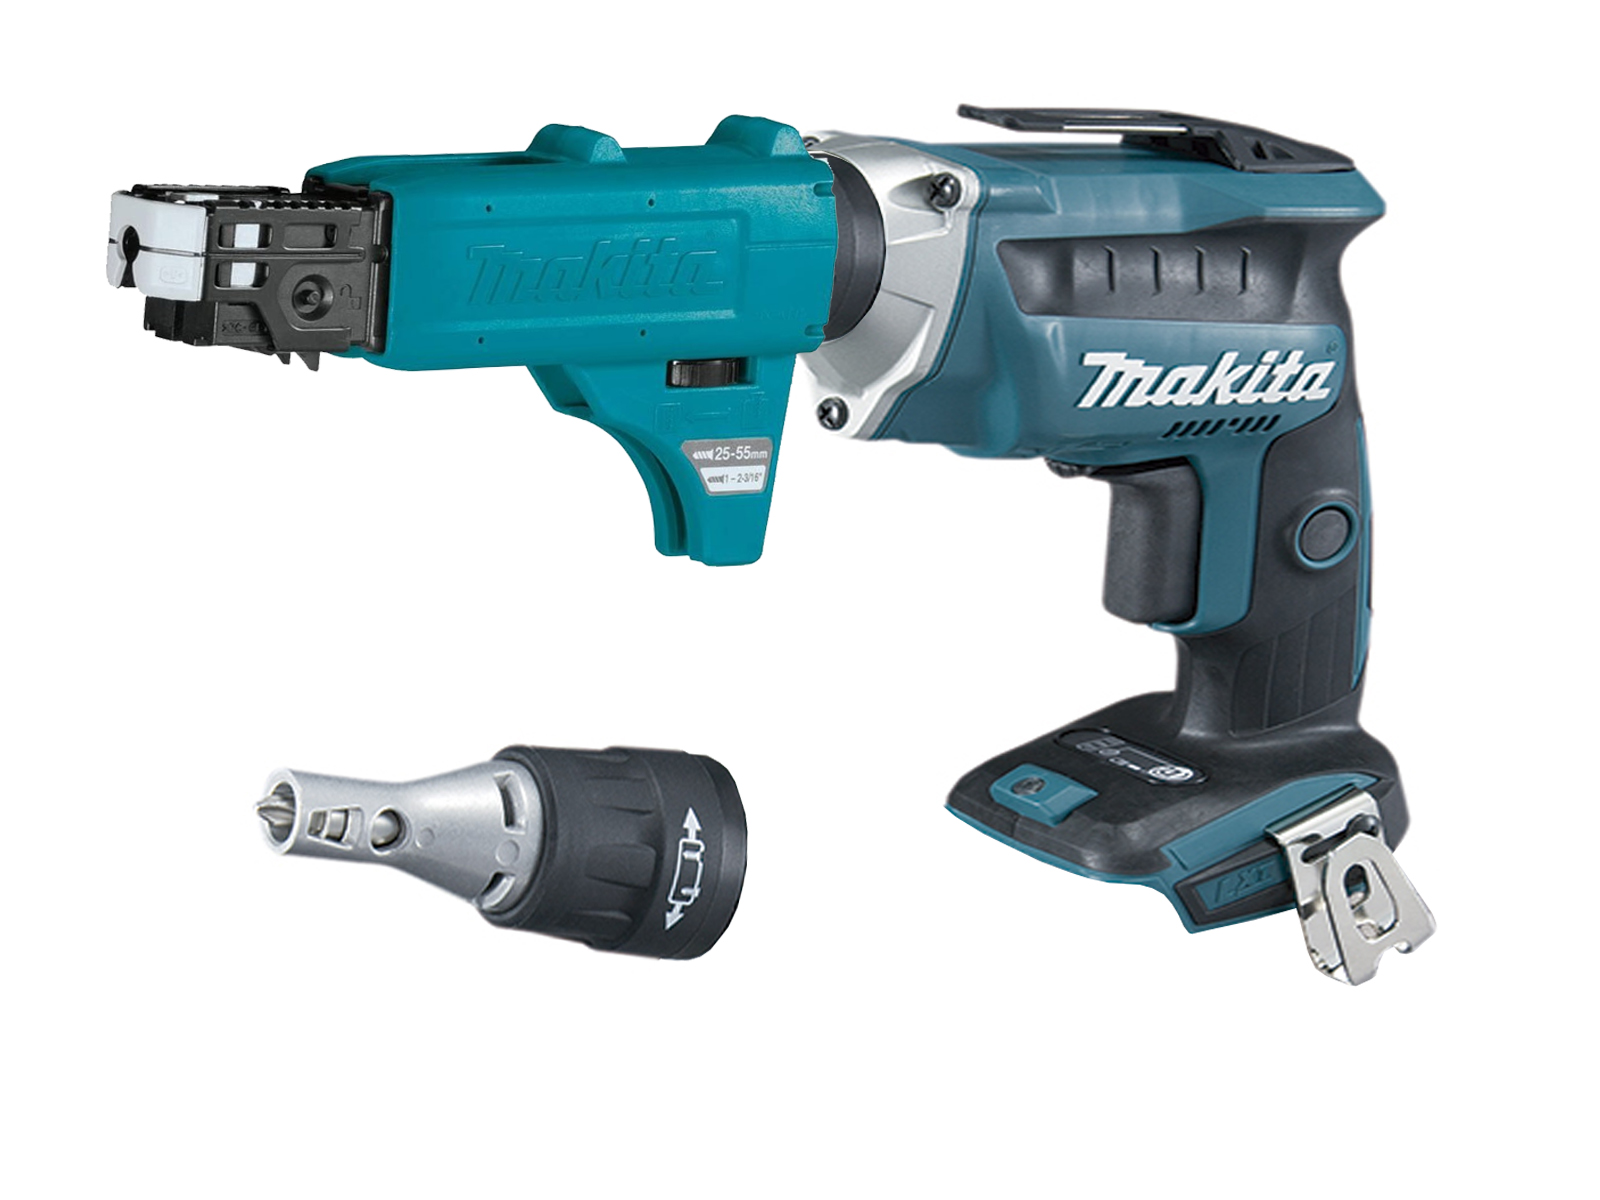 Makita DFS452F 18V Brushless Drywall Screwdriver & Collated Attachment - Body Only